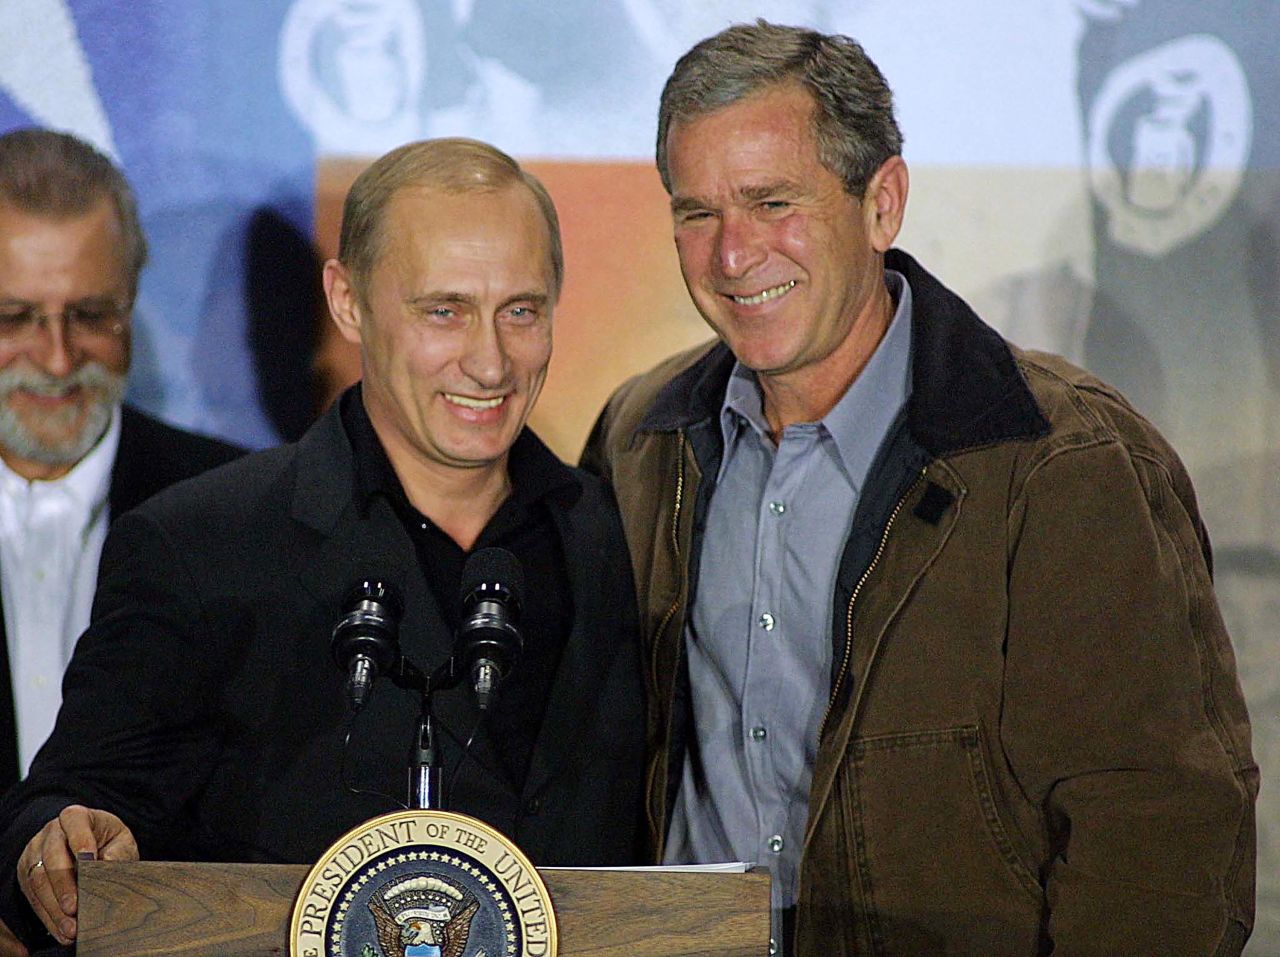 Putin and Bush smile after a news conference in Crawford, Texas, in 2001. Putin visited Bush's ranch in Crawford.